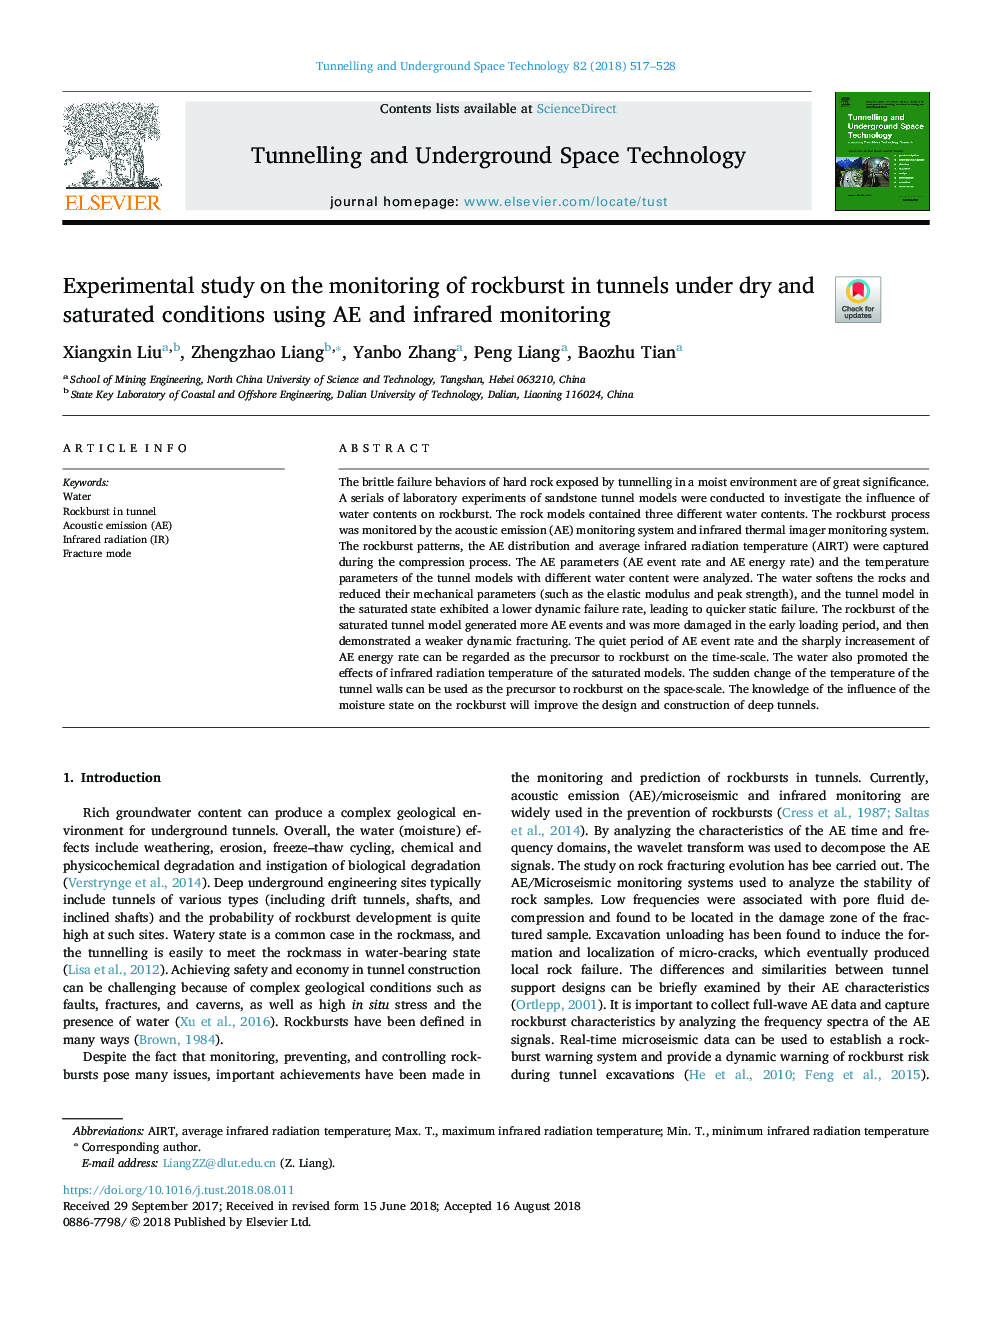 Experimental study on the monitoring of rockburst in tunnels under dry and saturated conditions using AE and infrared monitoring